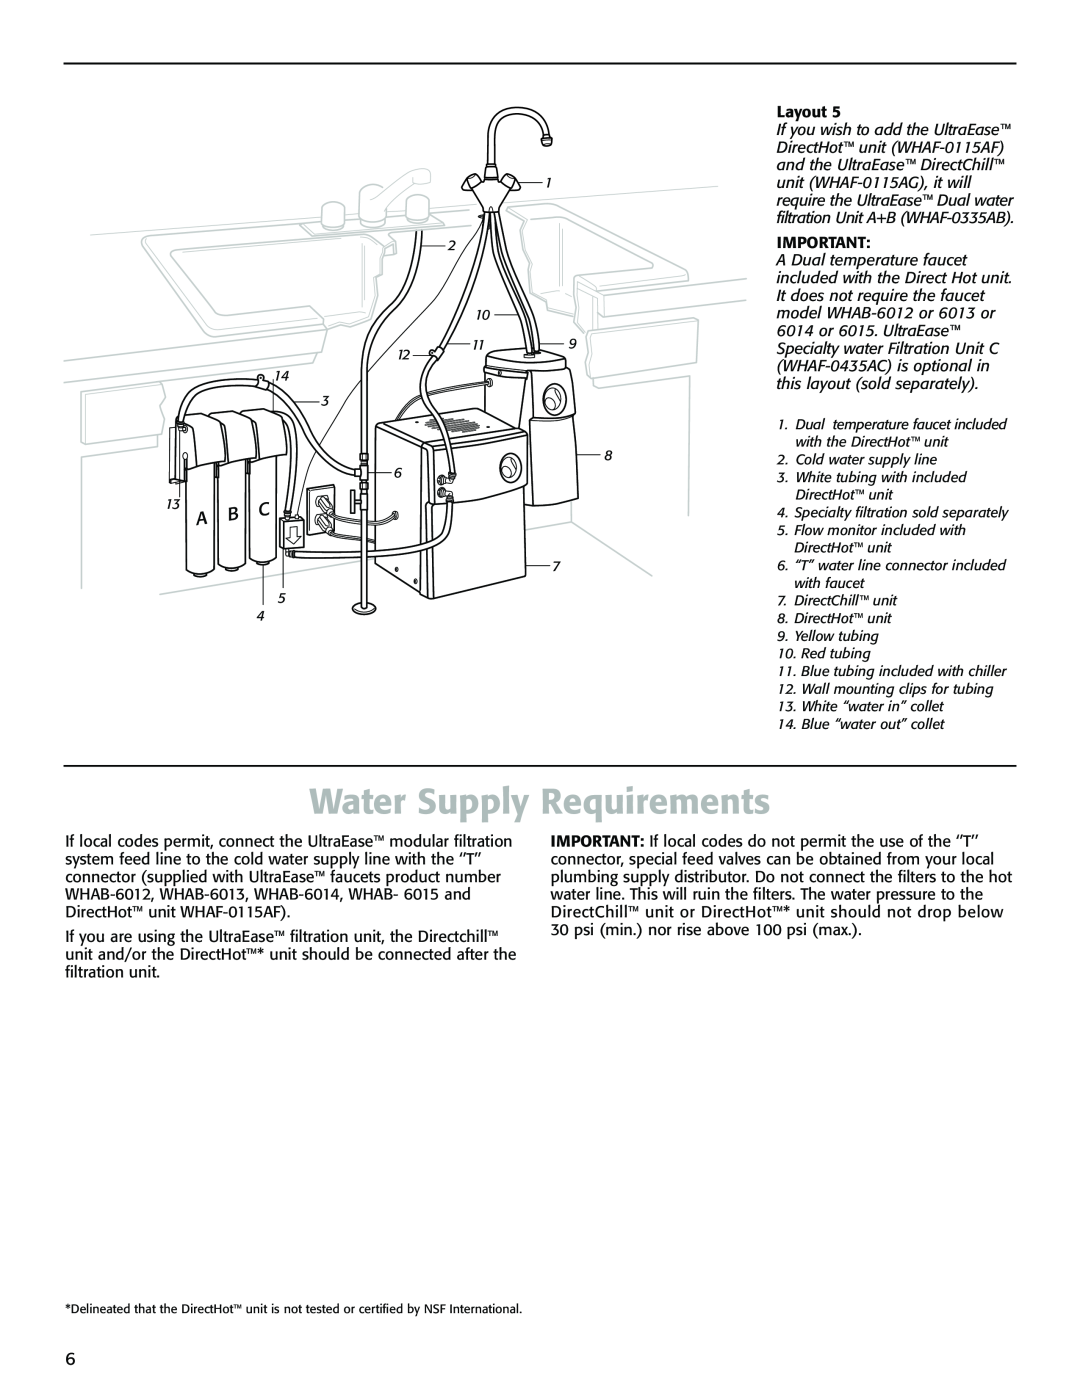 Whirlpool WHAB-6015, WHAB-6013, WHAB-6014, WHAF-0335AB, WHAB-6012, WHAF-0435AC Water Supply Requirements 